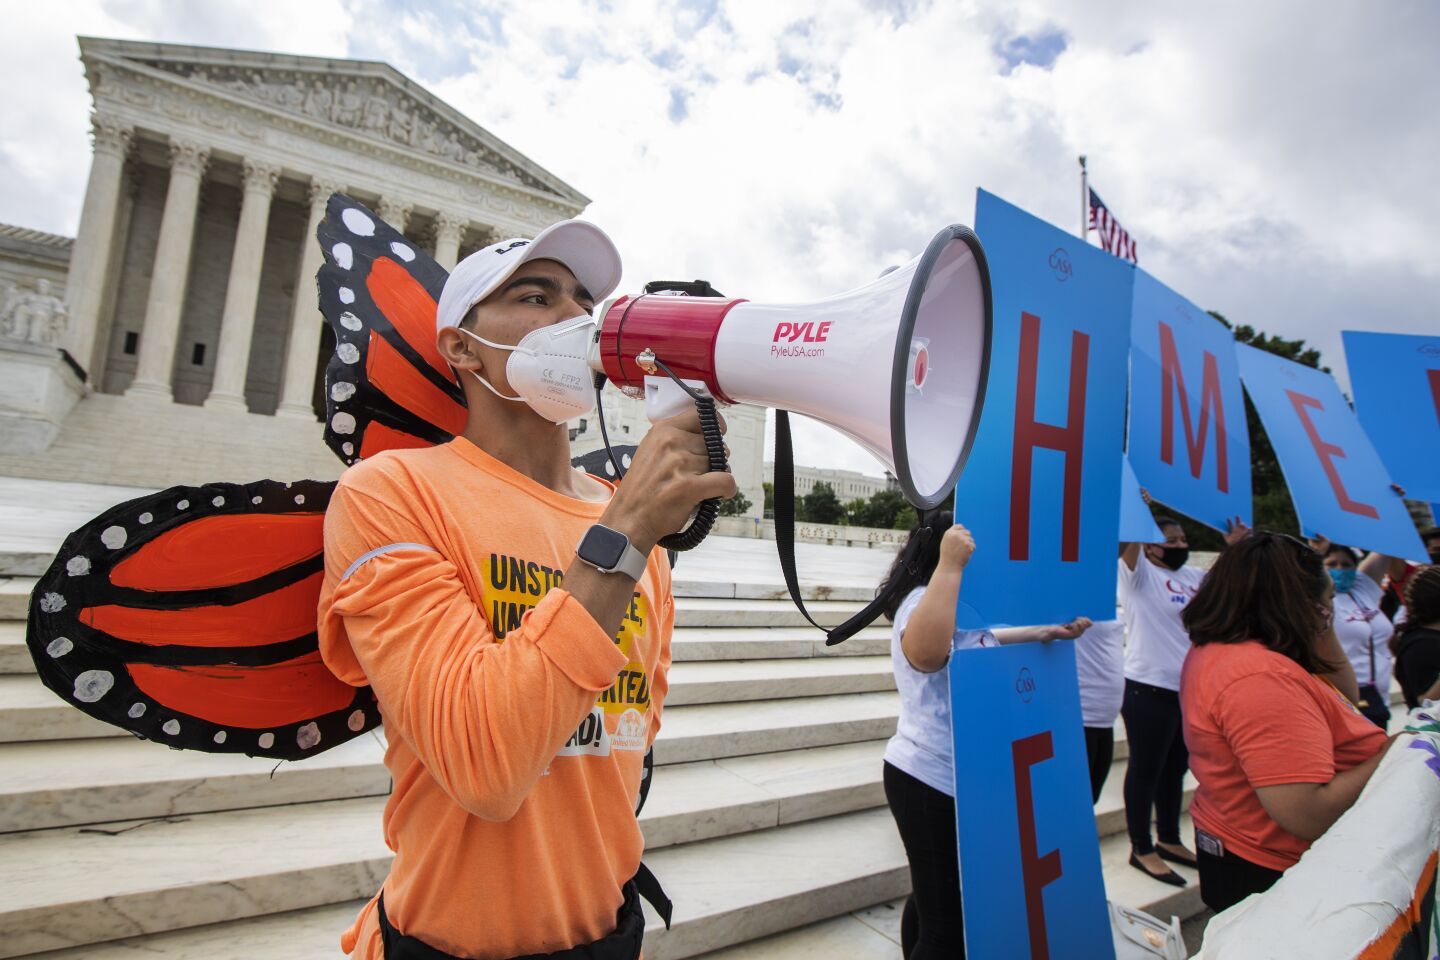 Deferred Action for Childhood Arrivals recipient Roberto Martinez celebrates in front of the Supreme Court.